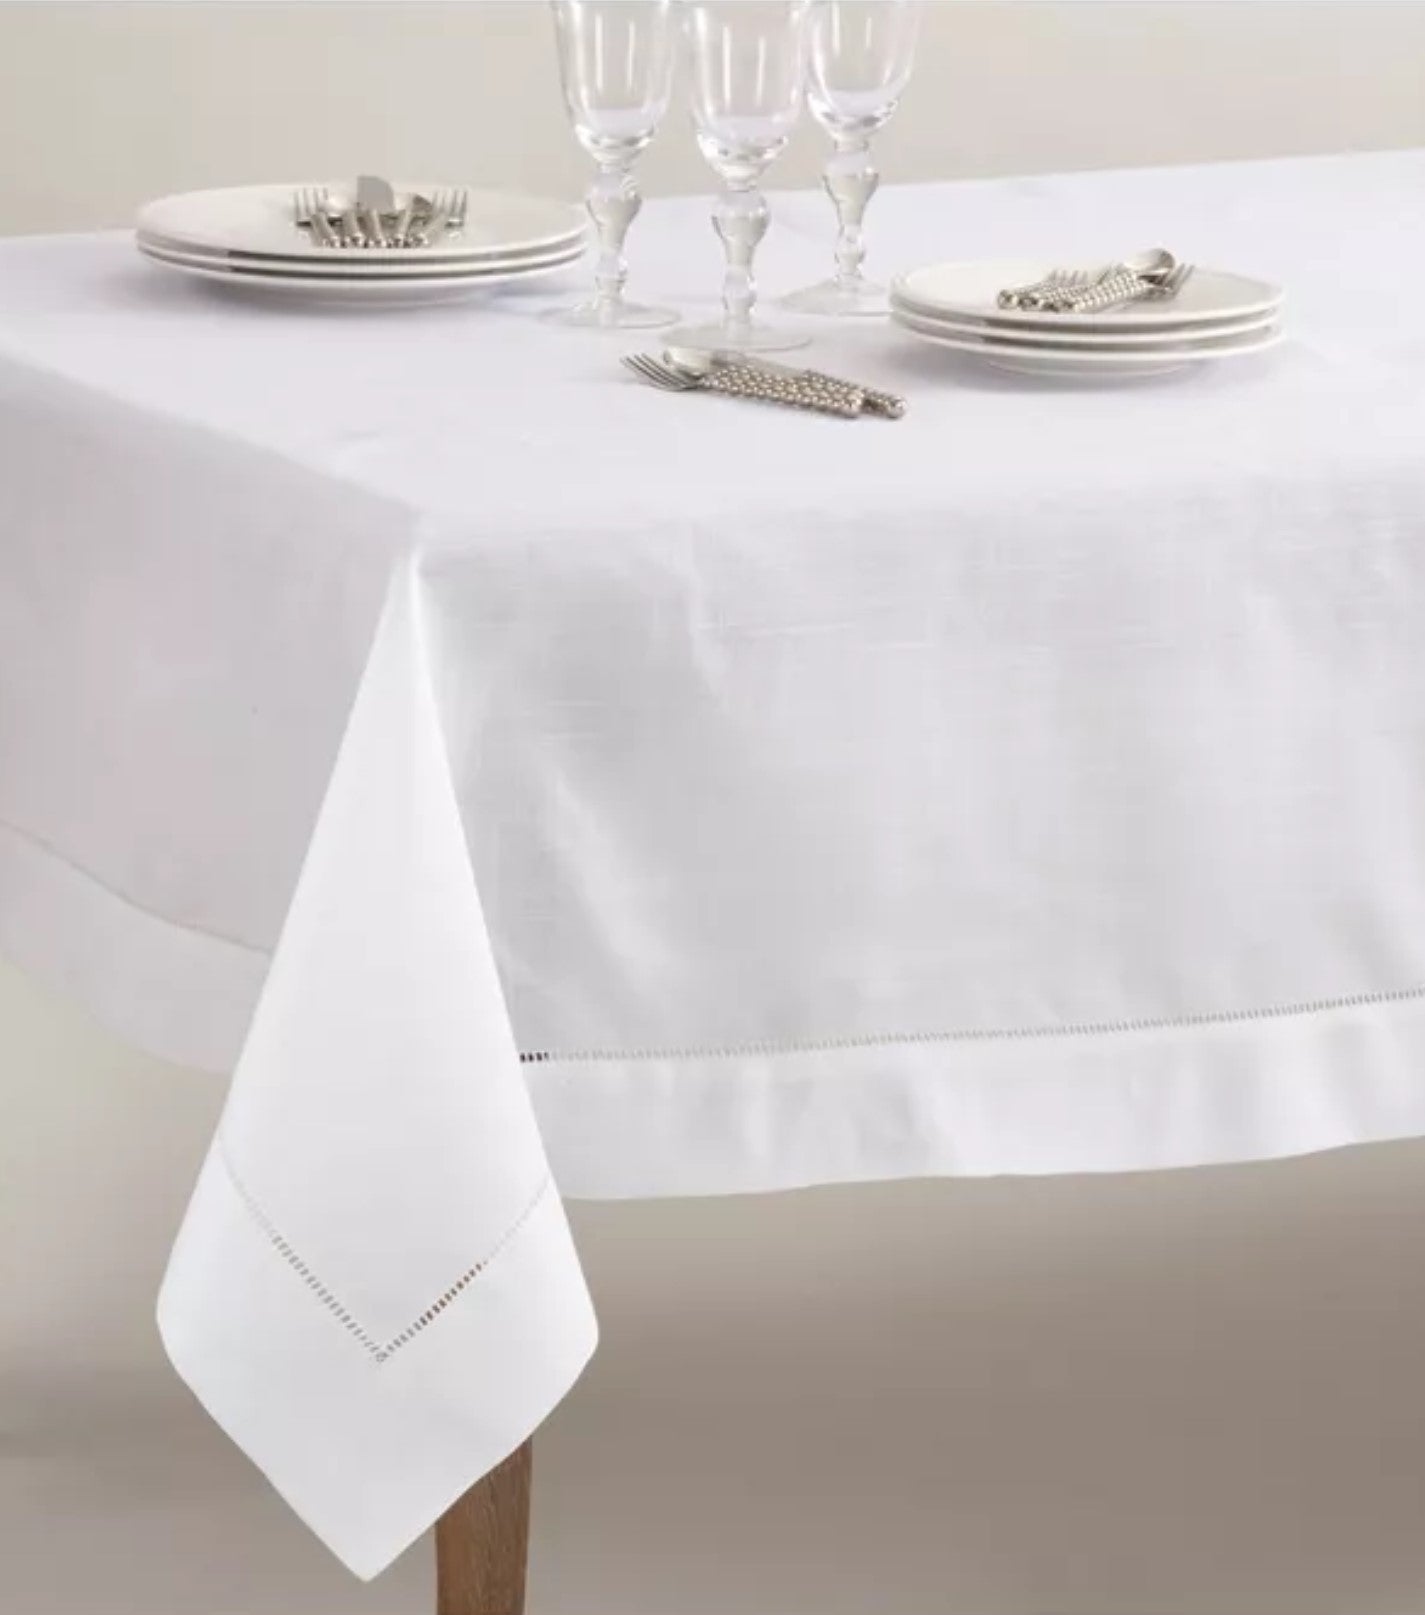 White Linen Hemstitched Tablecloths, Various Sizes